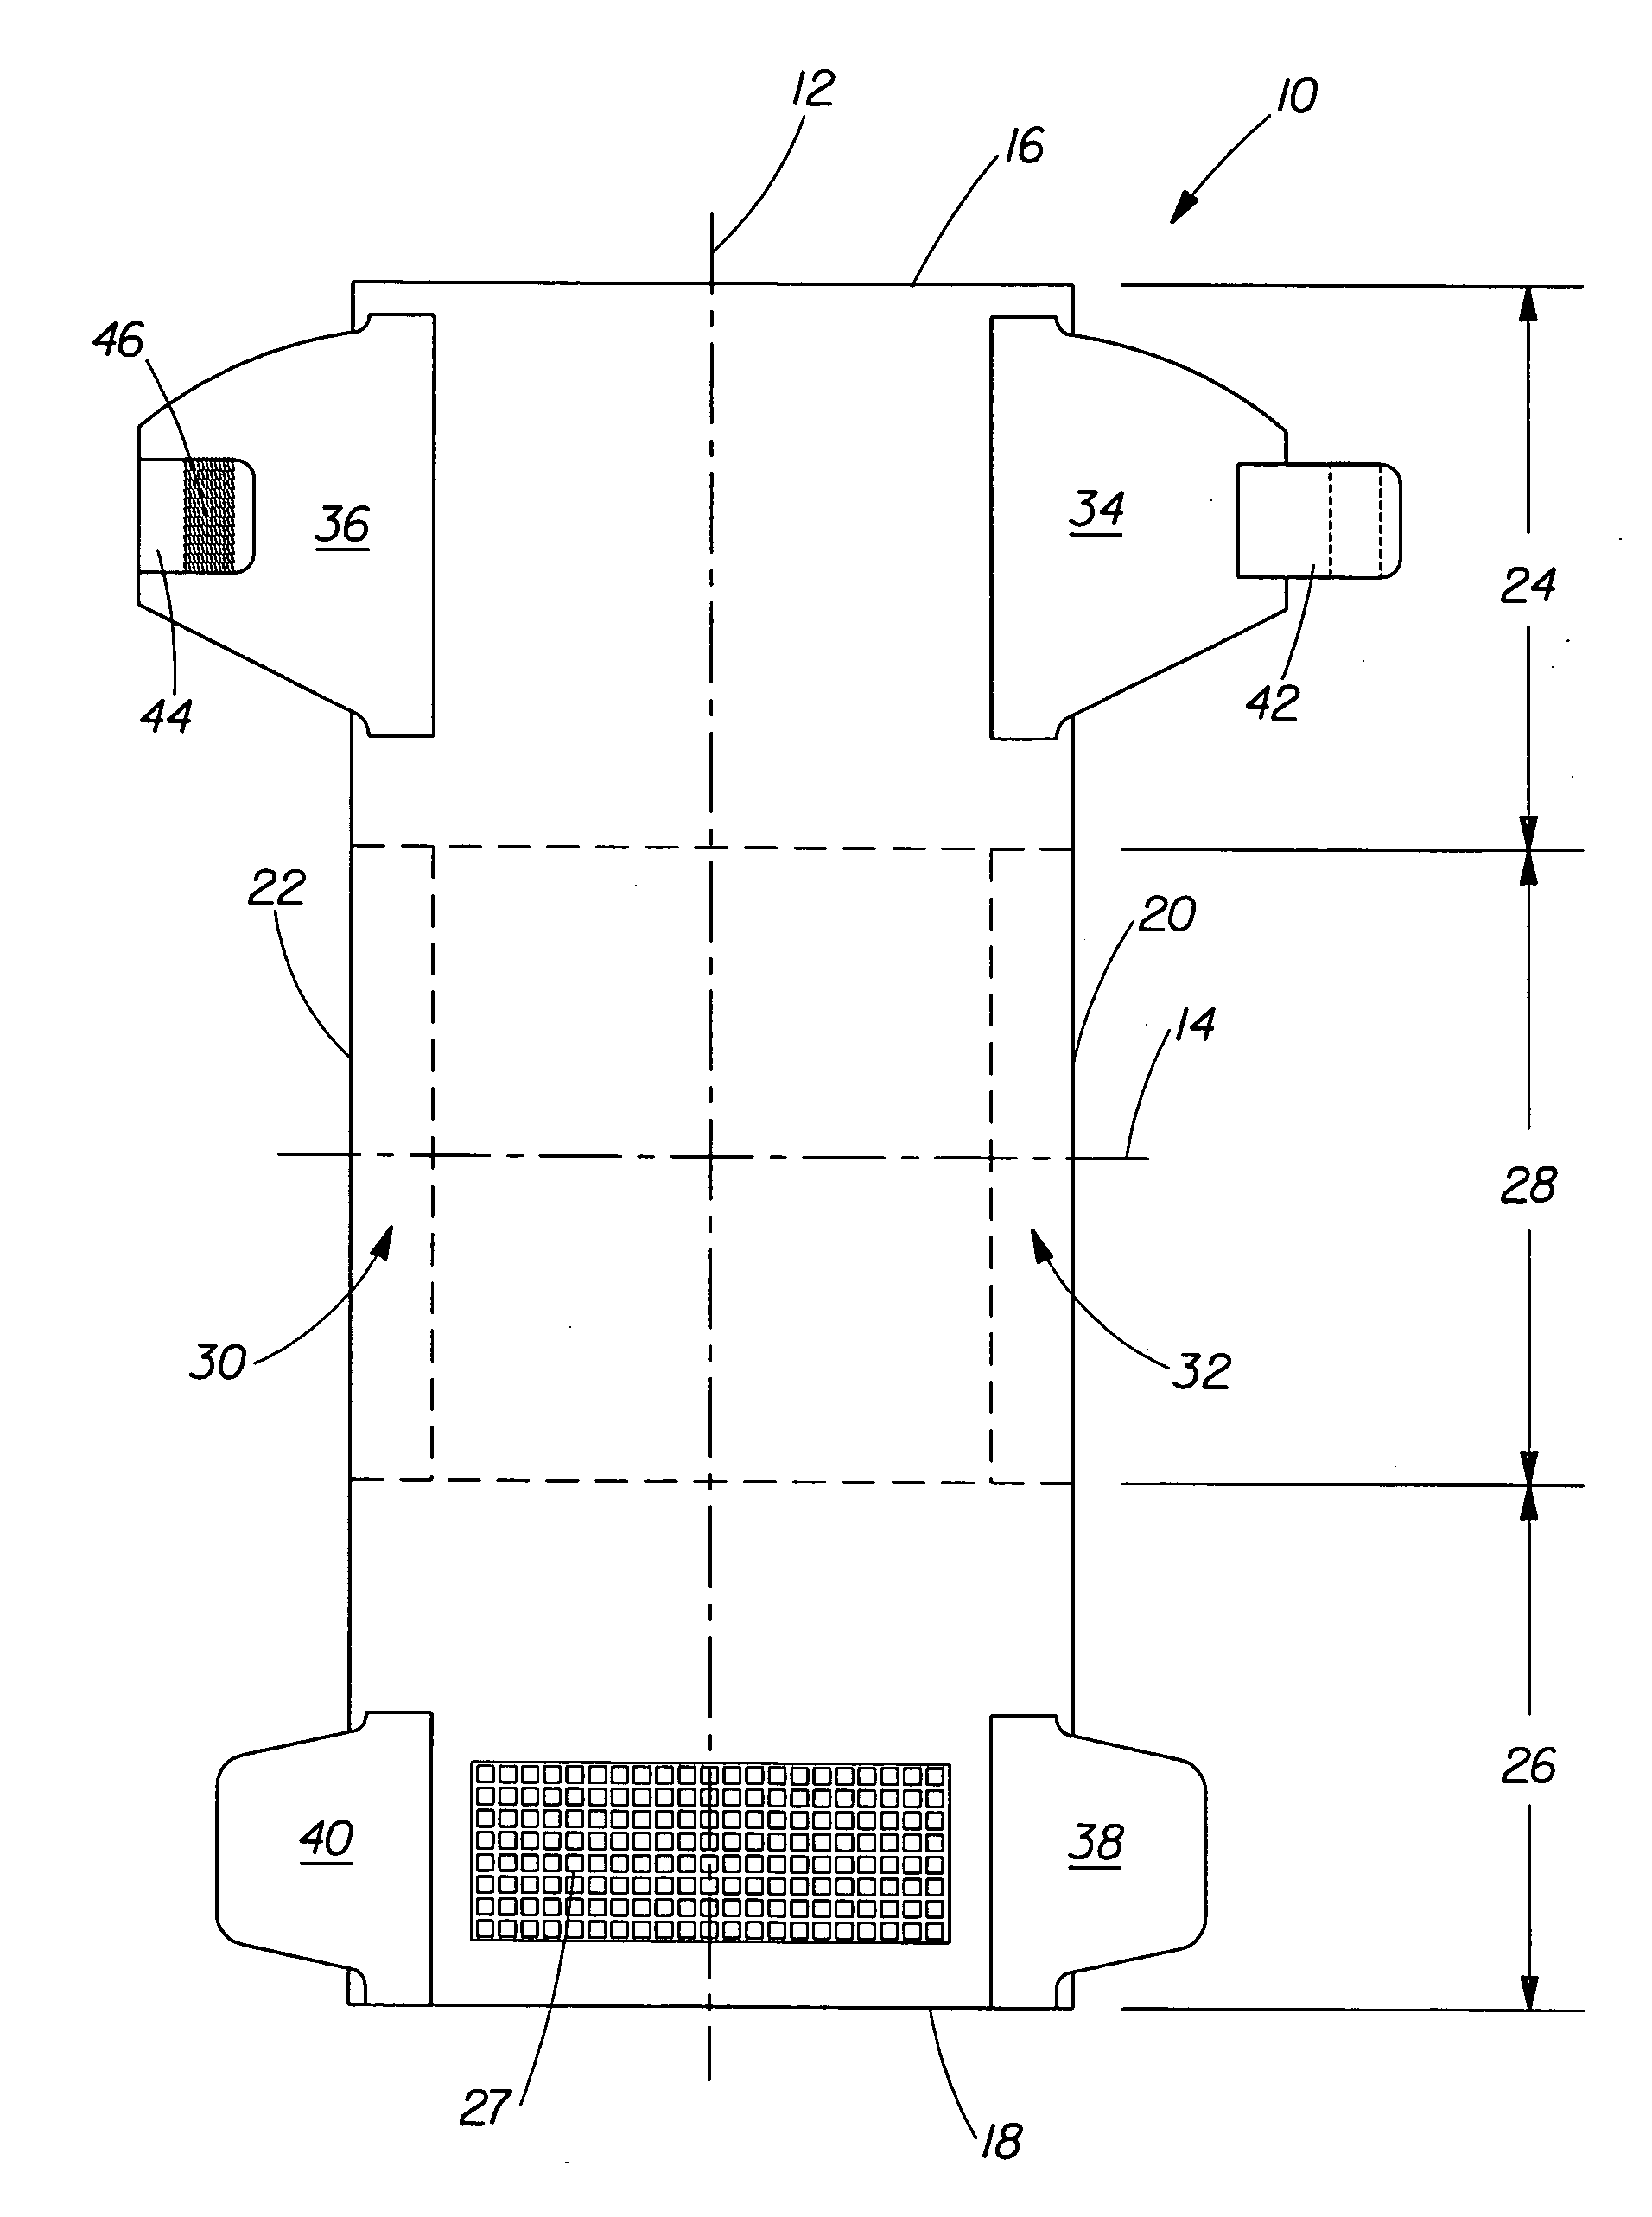 Disposable absorbent articles with components having both plastic and elastic properties